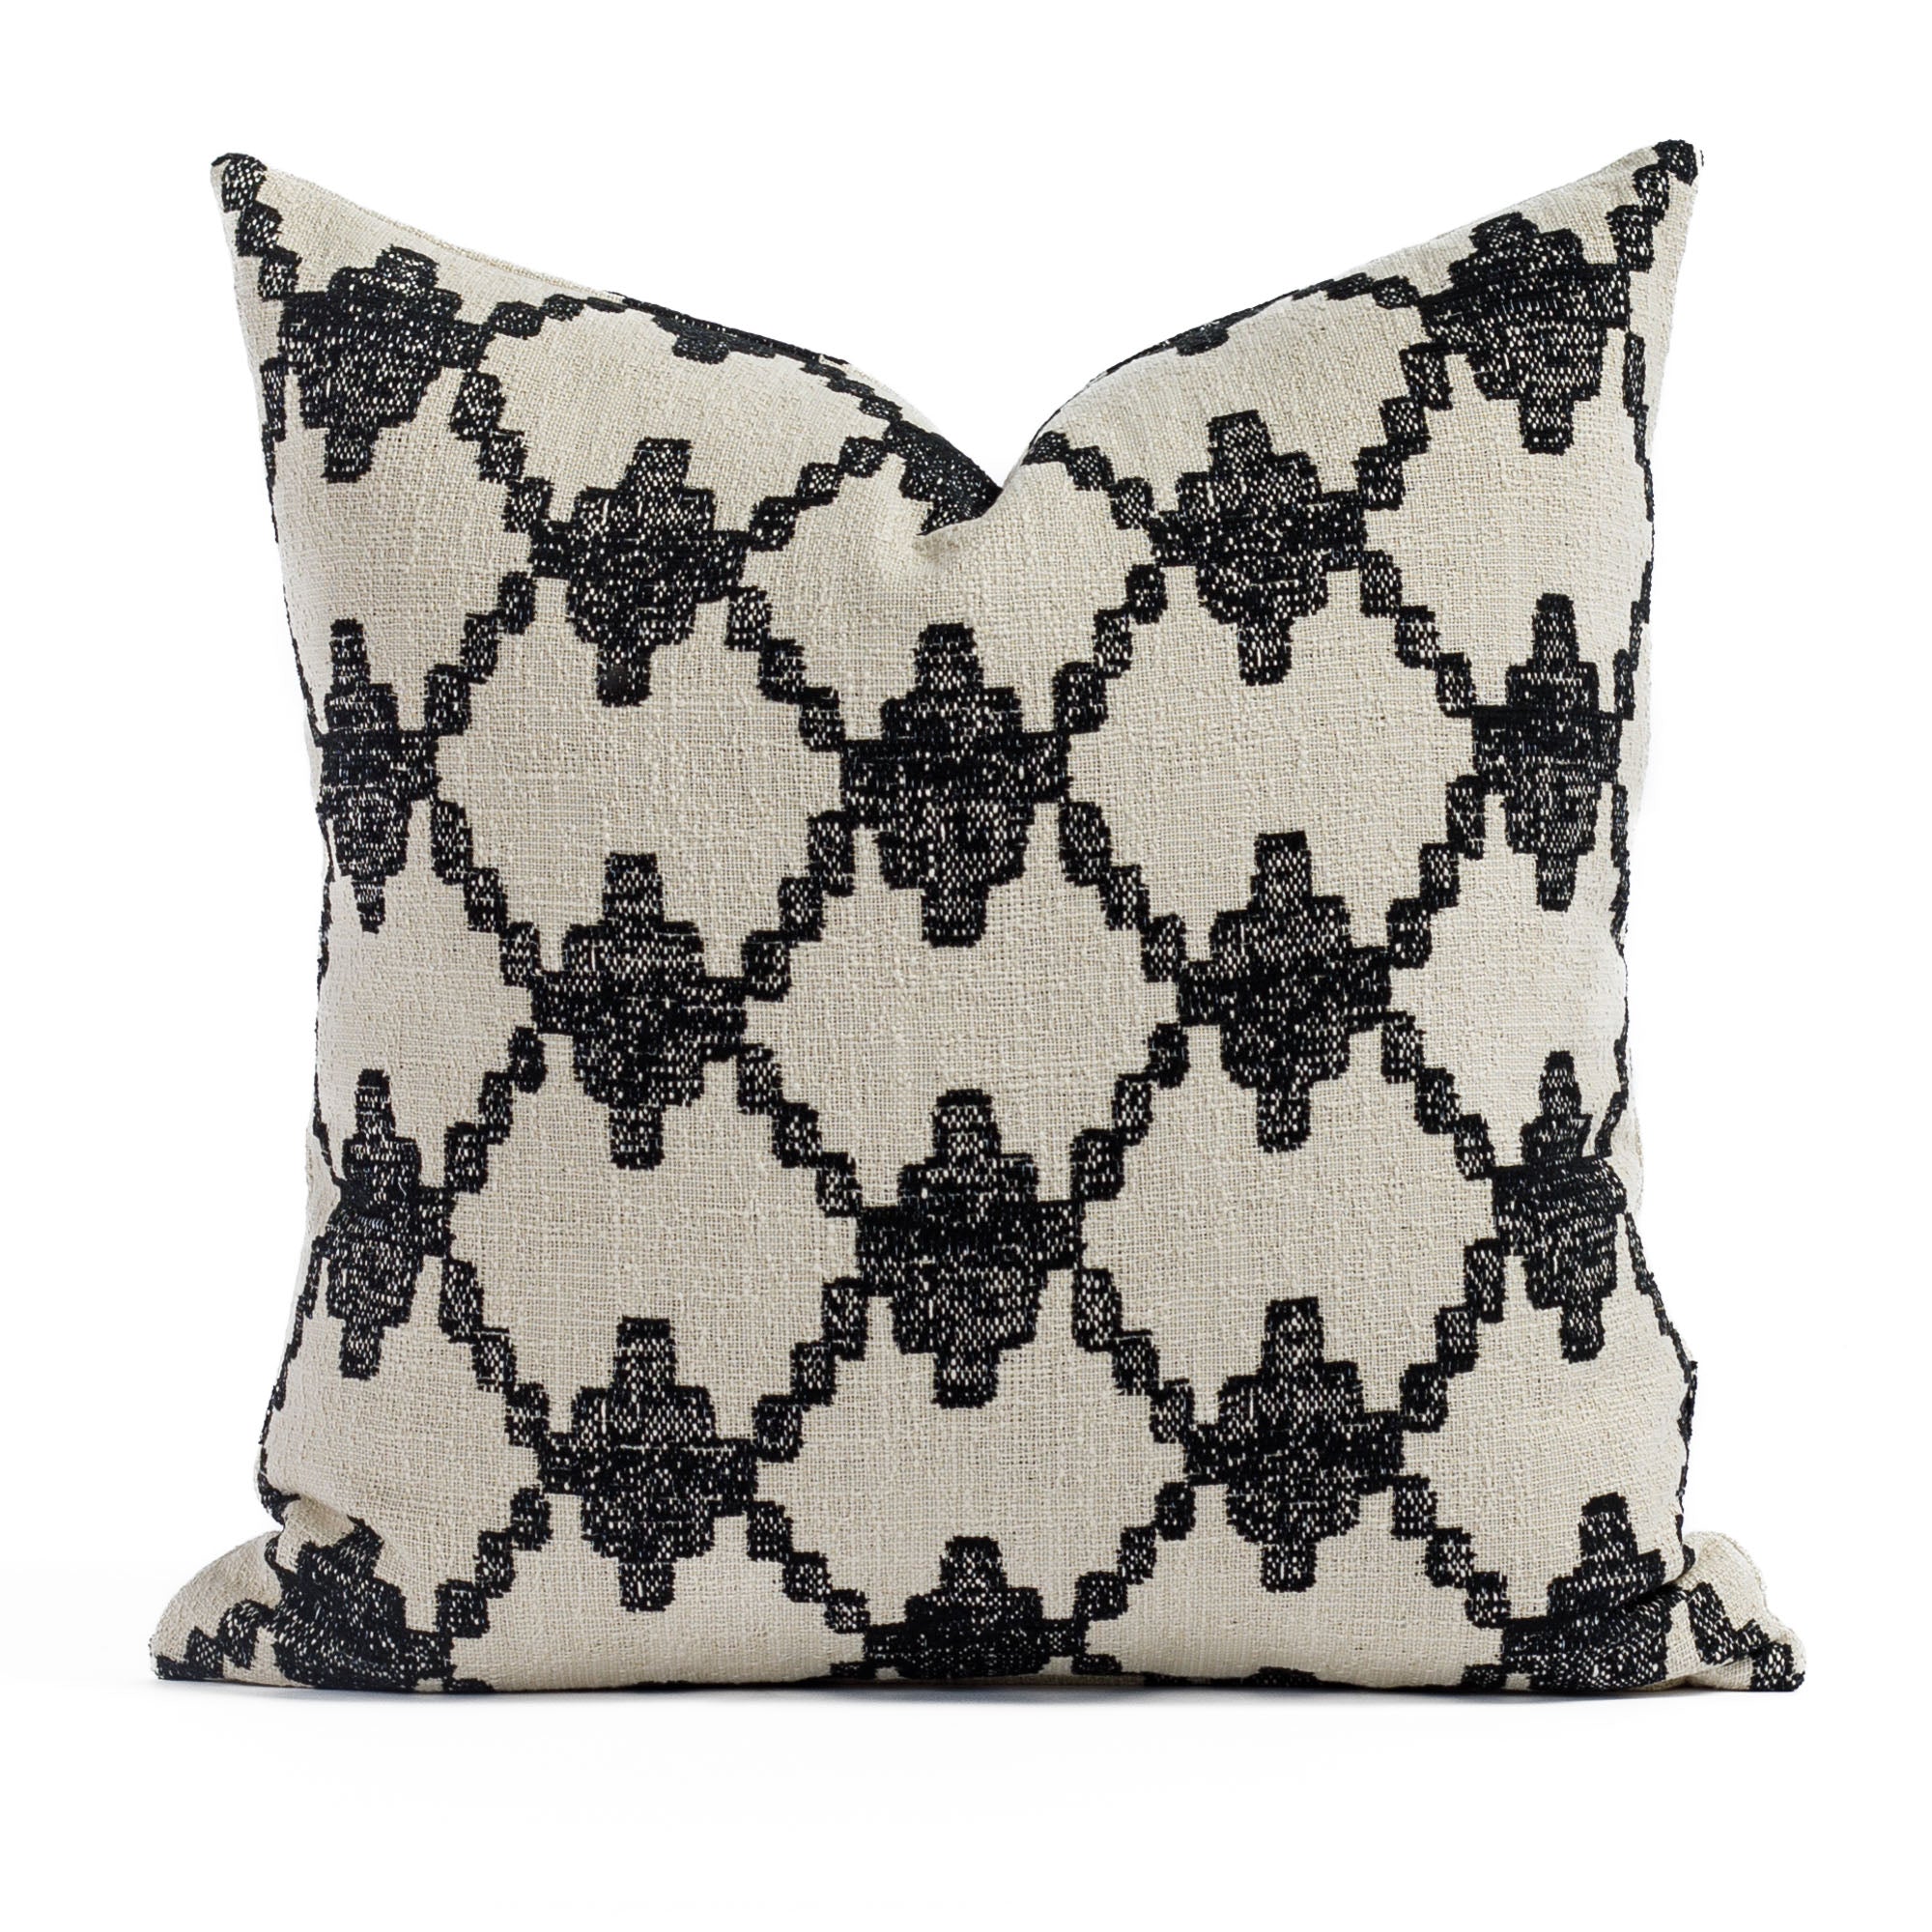 Fez 20x20 Carbon, a black and burlap diamond trellis global patterned pillow from Tonic Living 